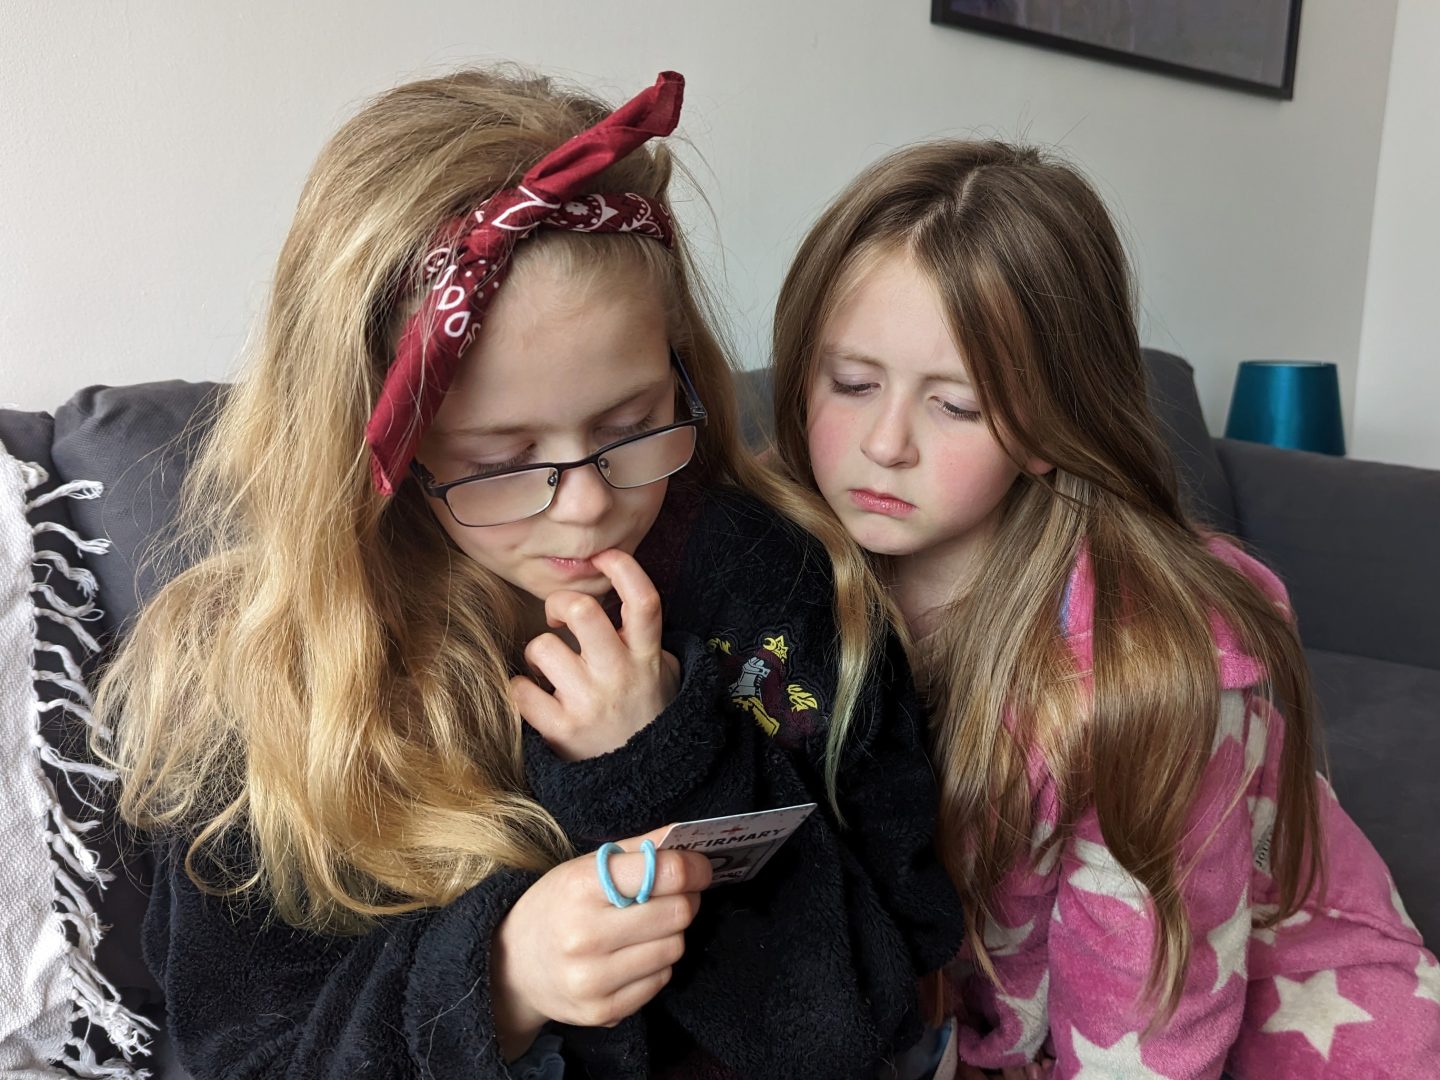 Libby and Lia looking puzzled trying to work out the answer to a question to get their phones back